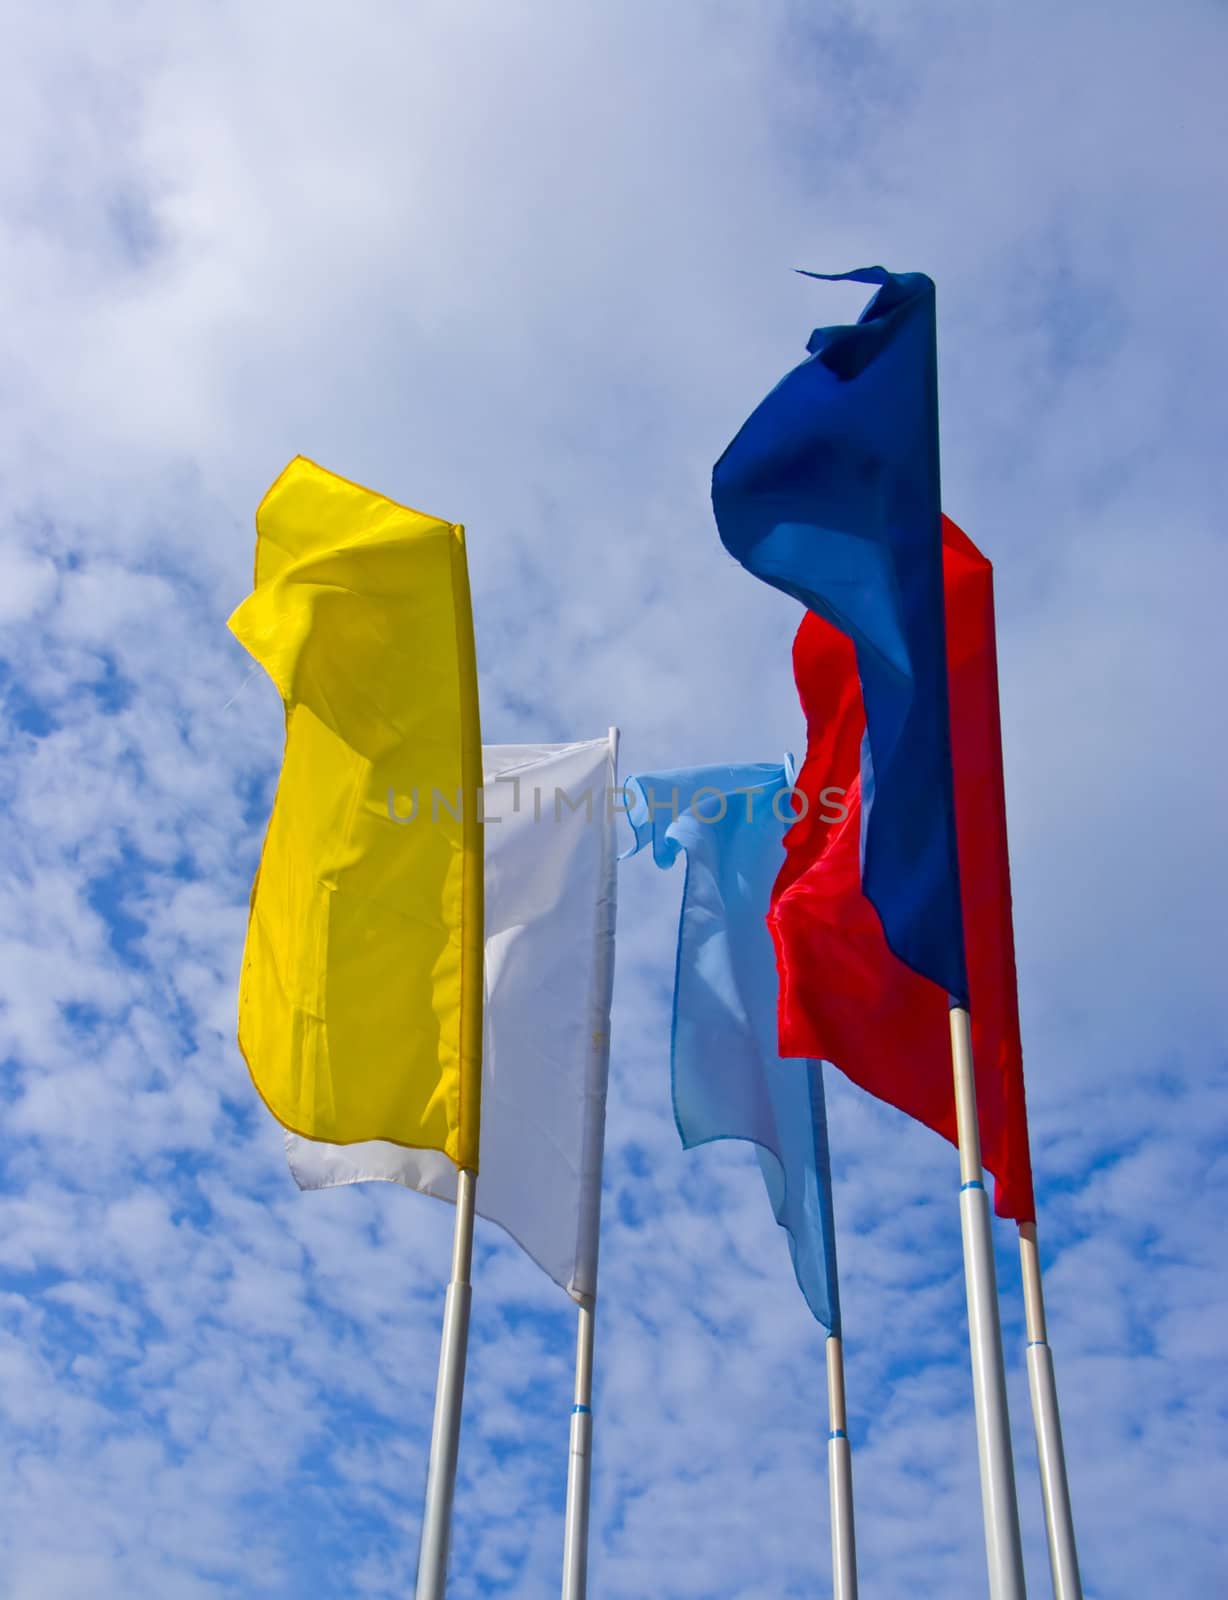 The image of developing flags against the blue sky